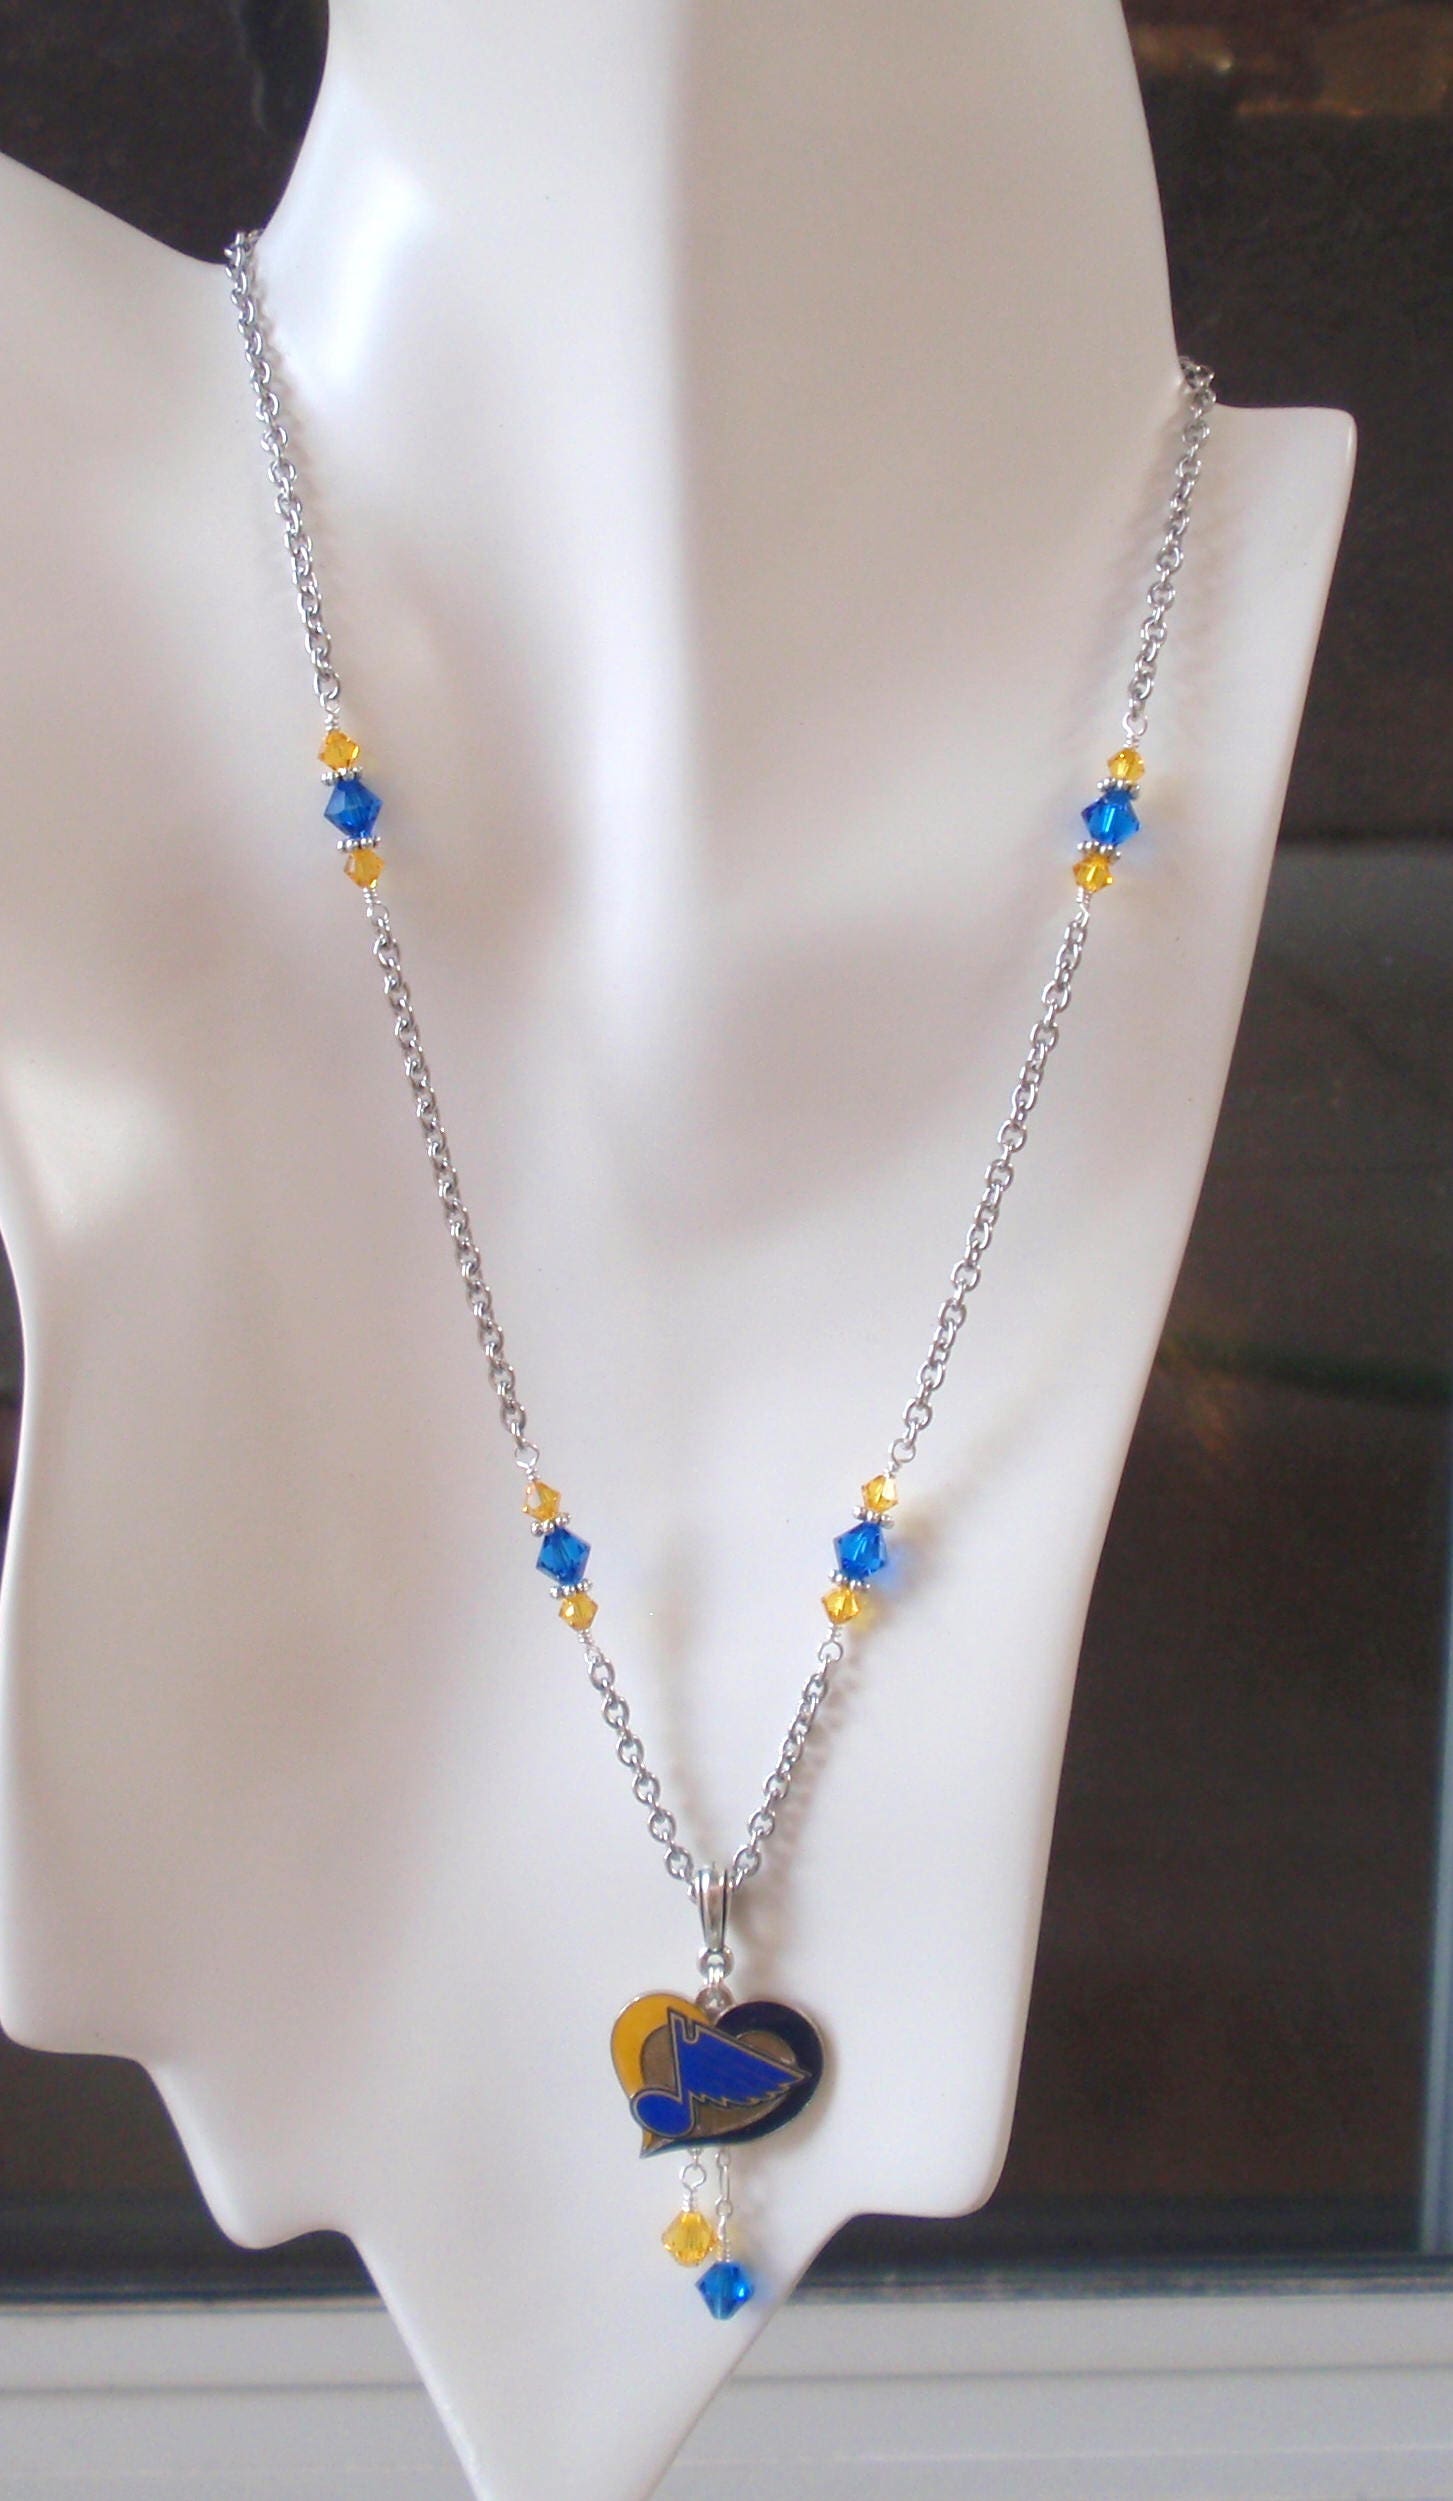 St. Louis Blues Lusso Stainless Steel Blues Bar Necklace